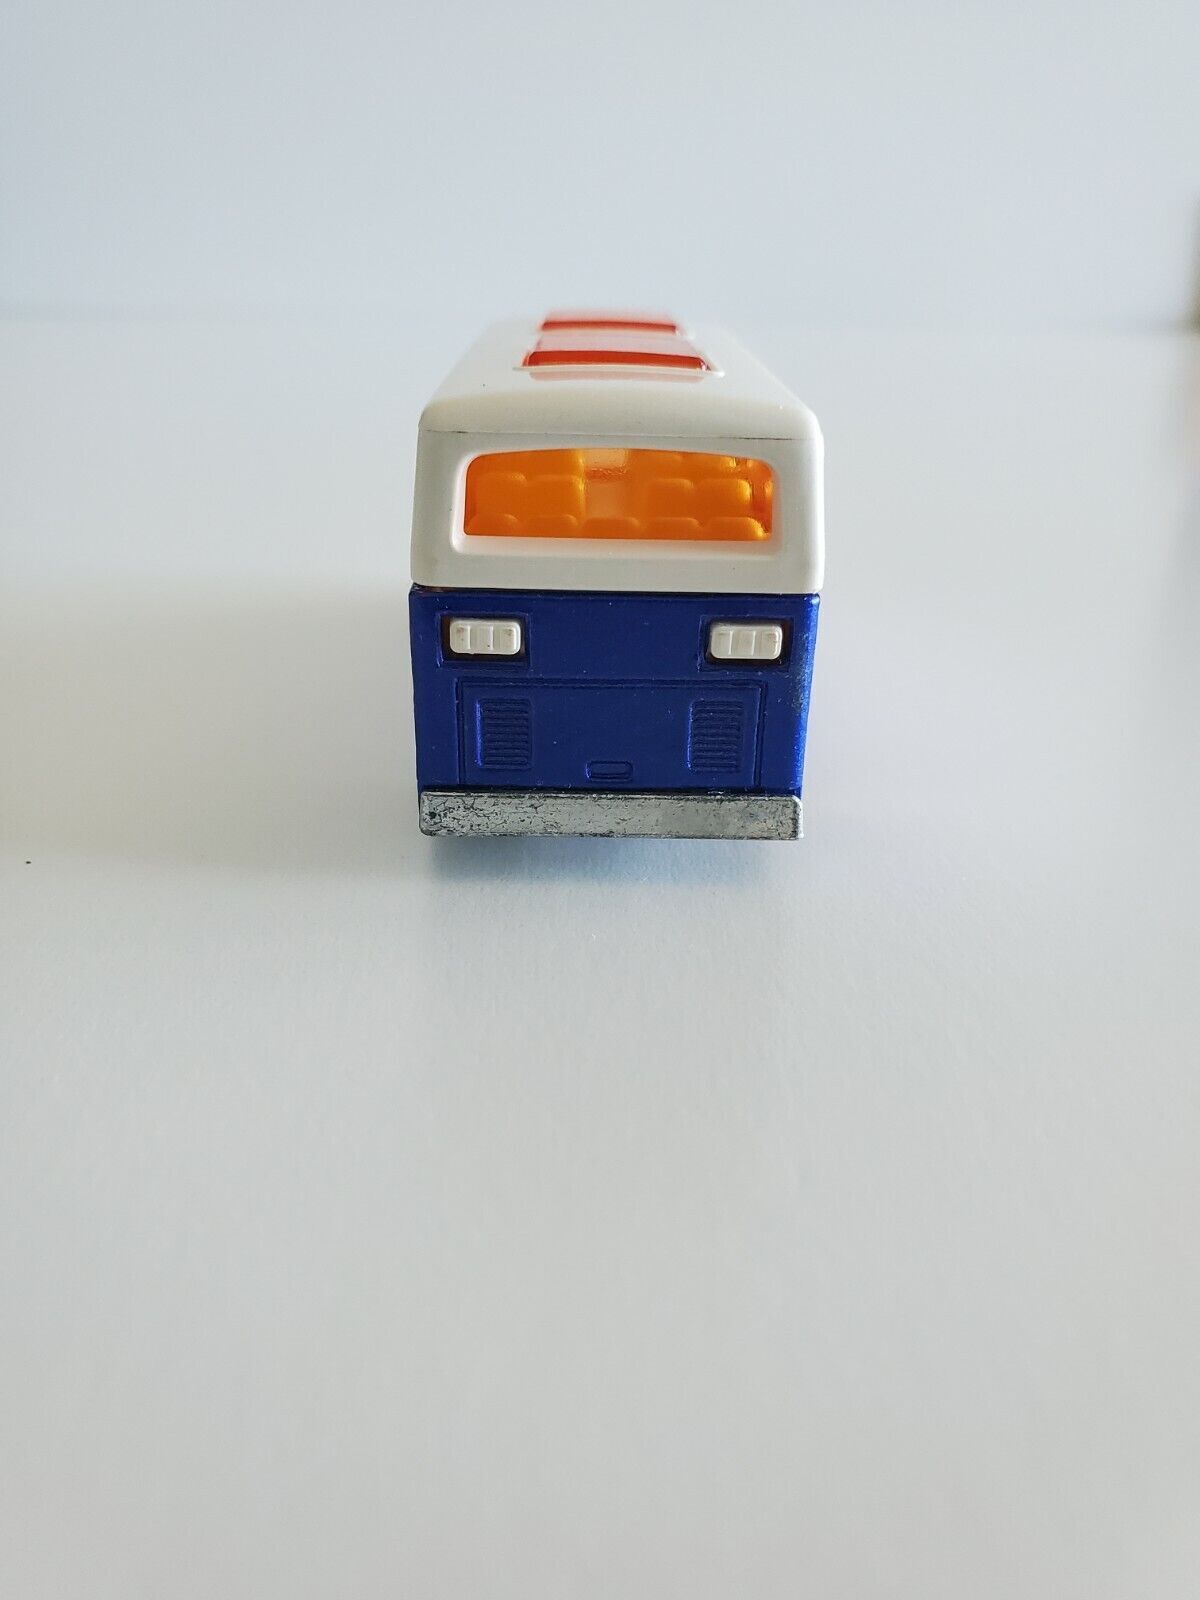 1977 Matchbox Lesney Airport Coach American Airlines #65 - Nice!